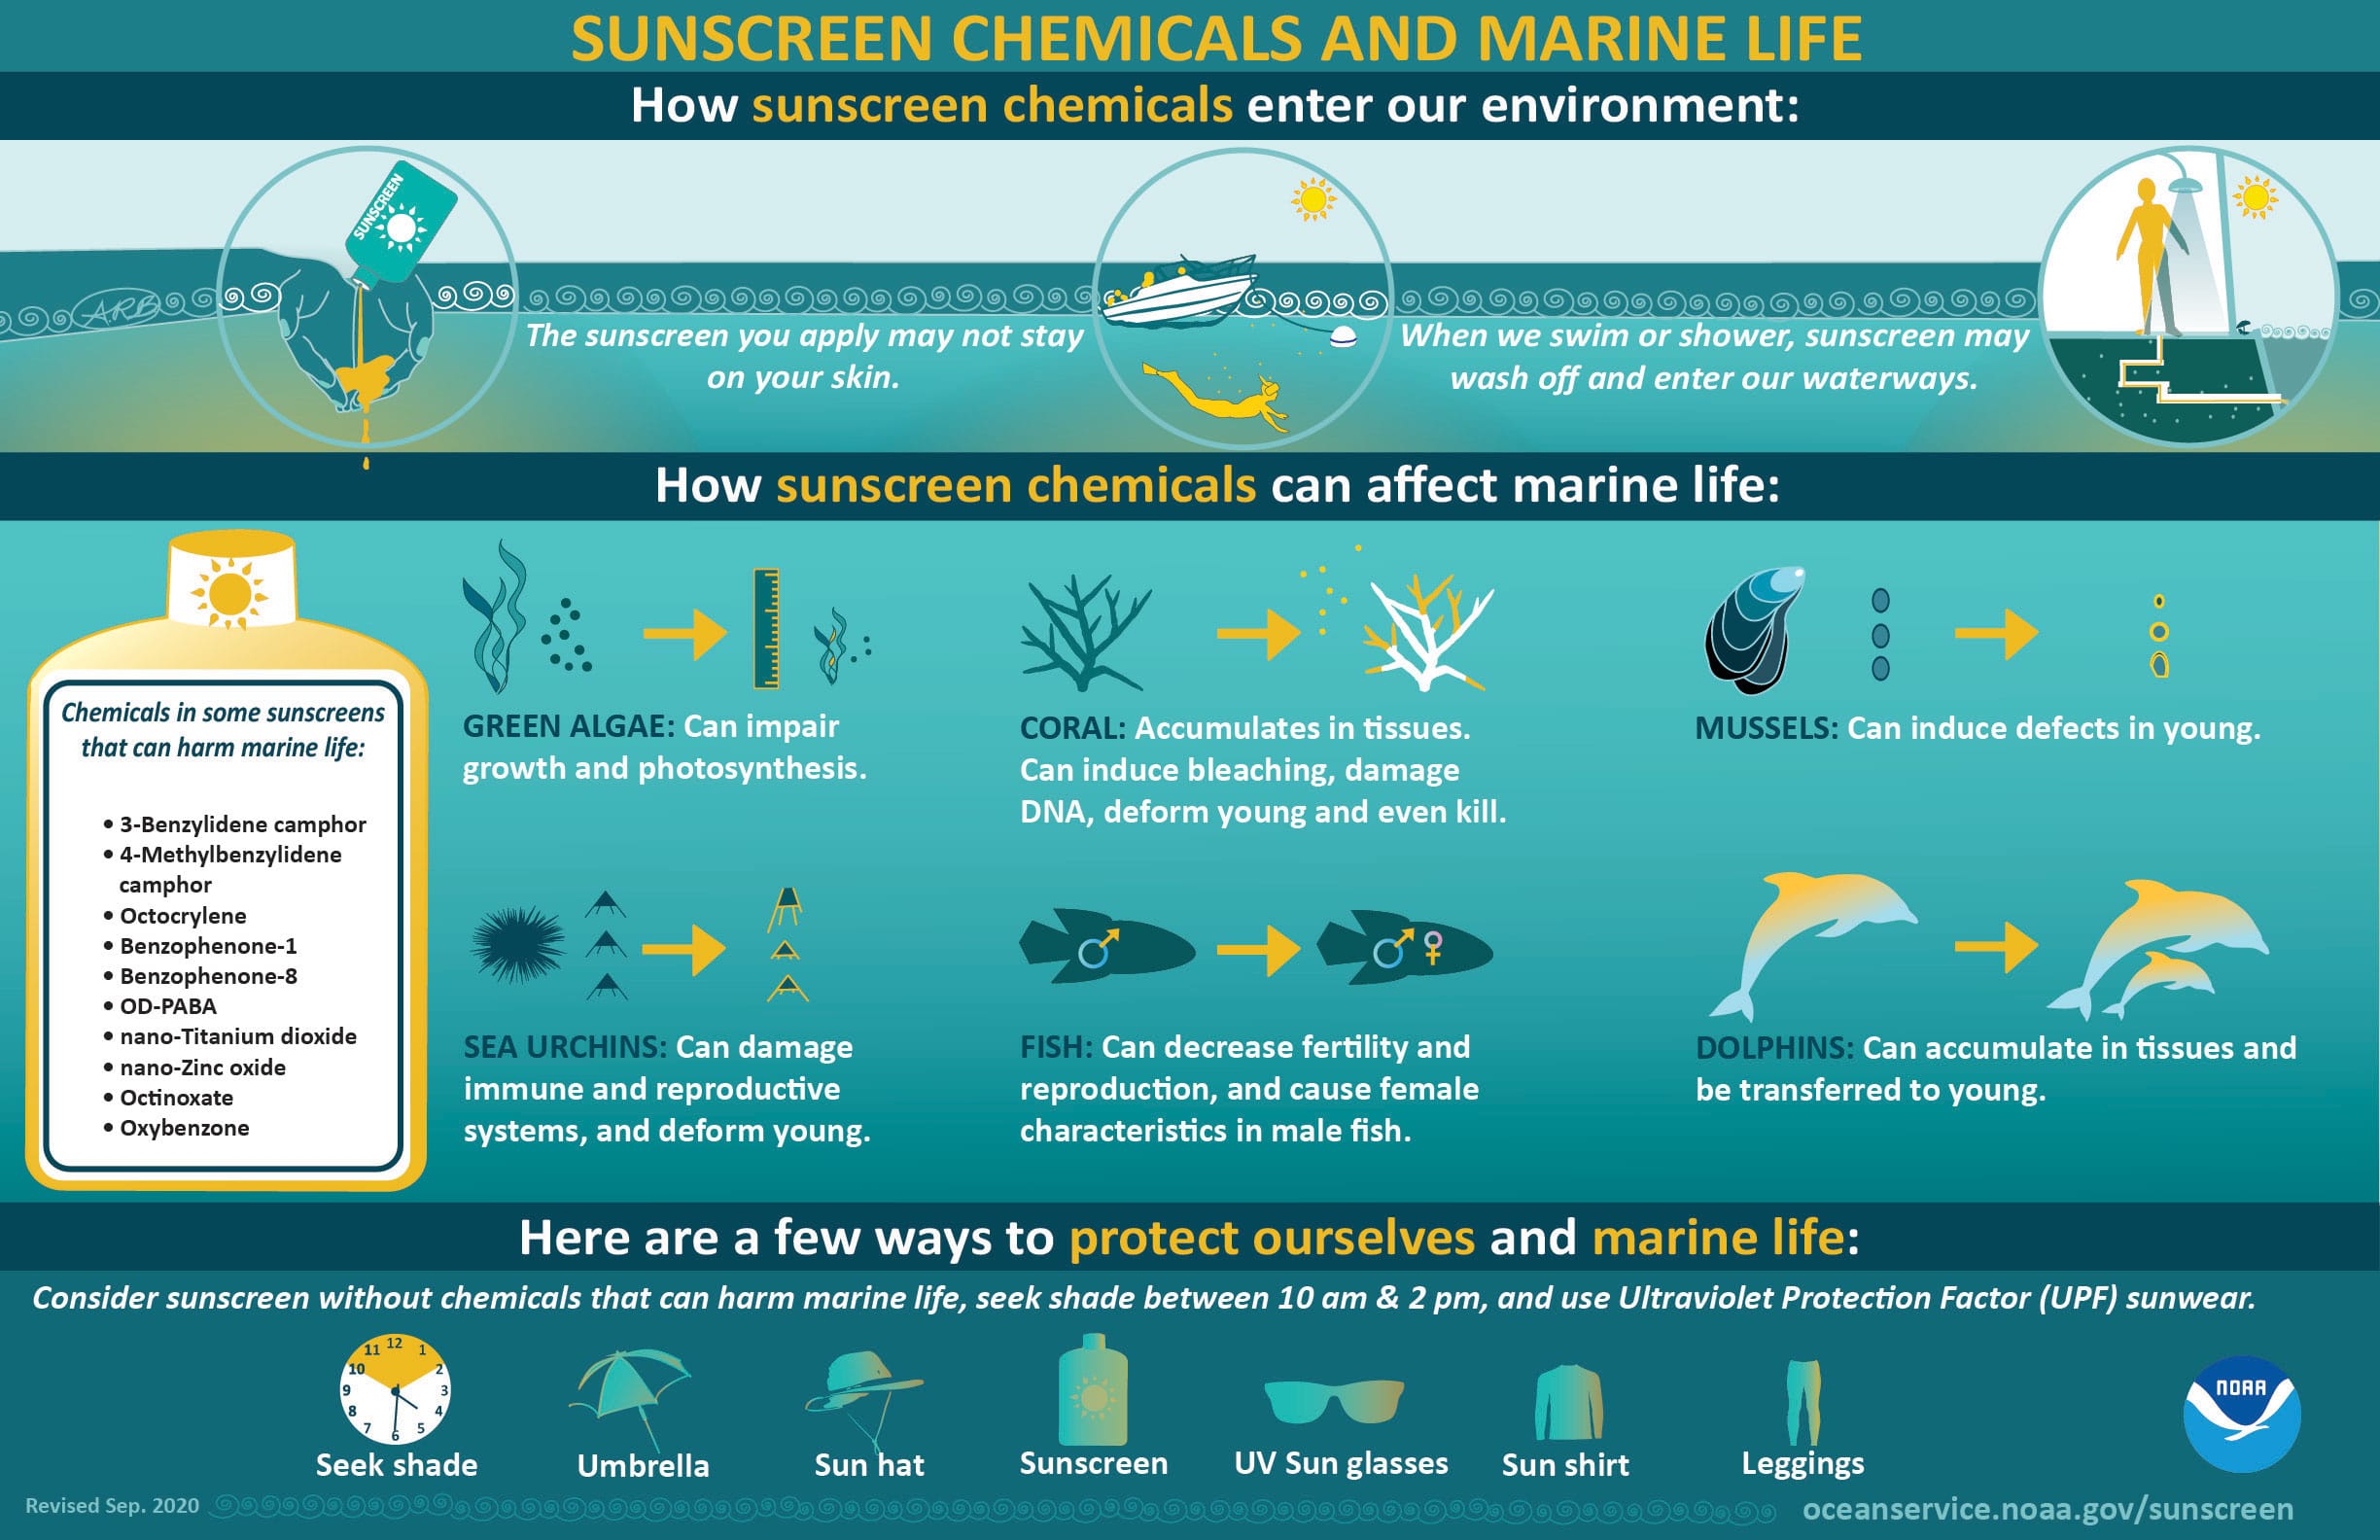 How SUNSCREEN CHEMICALS AFFECT MARINE LIFE